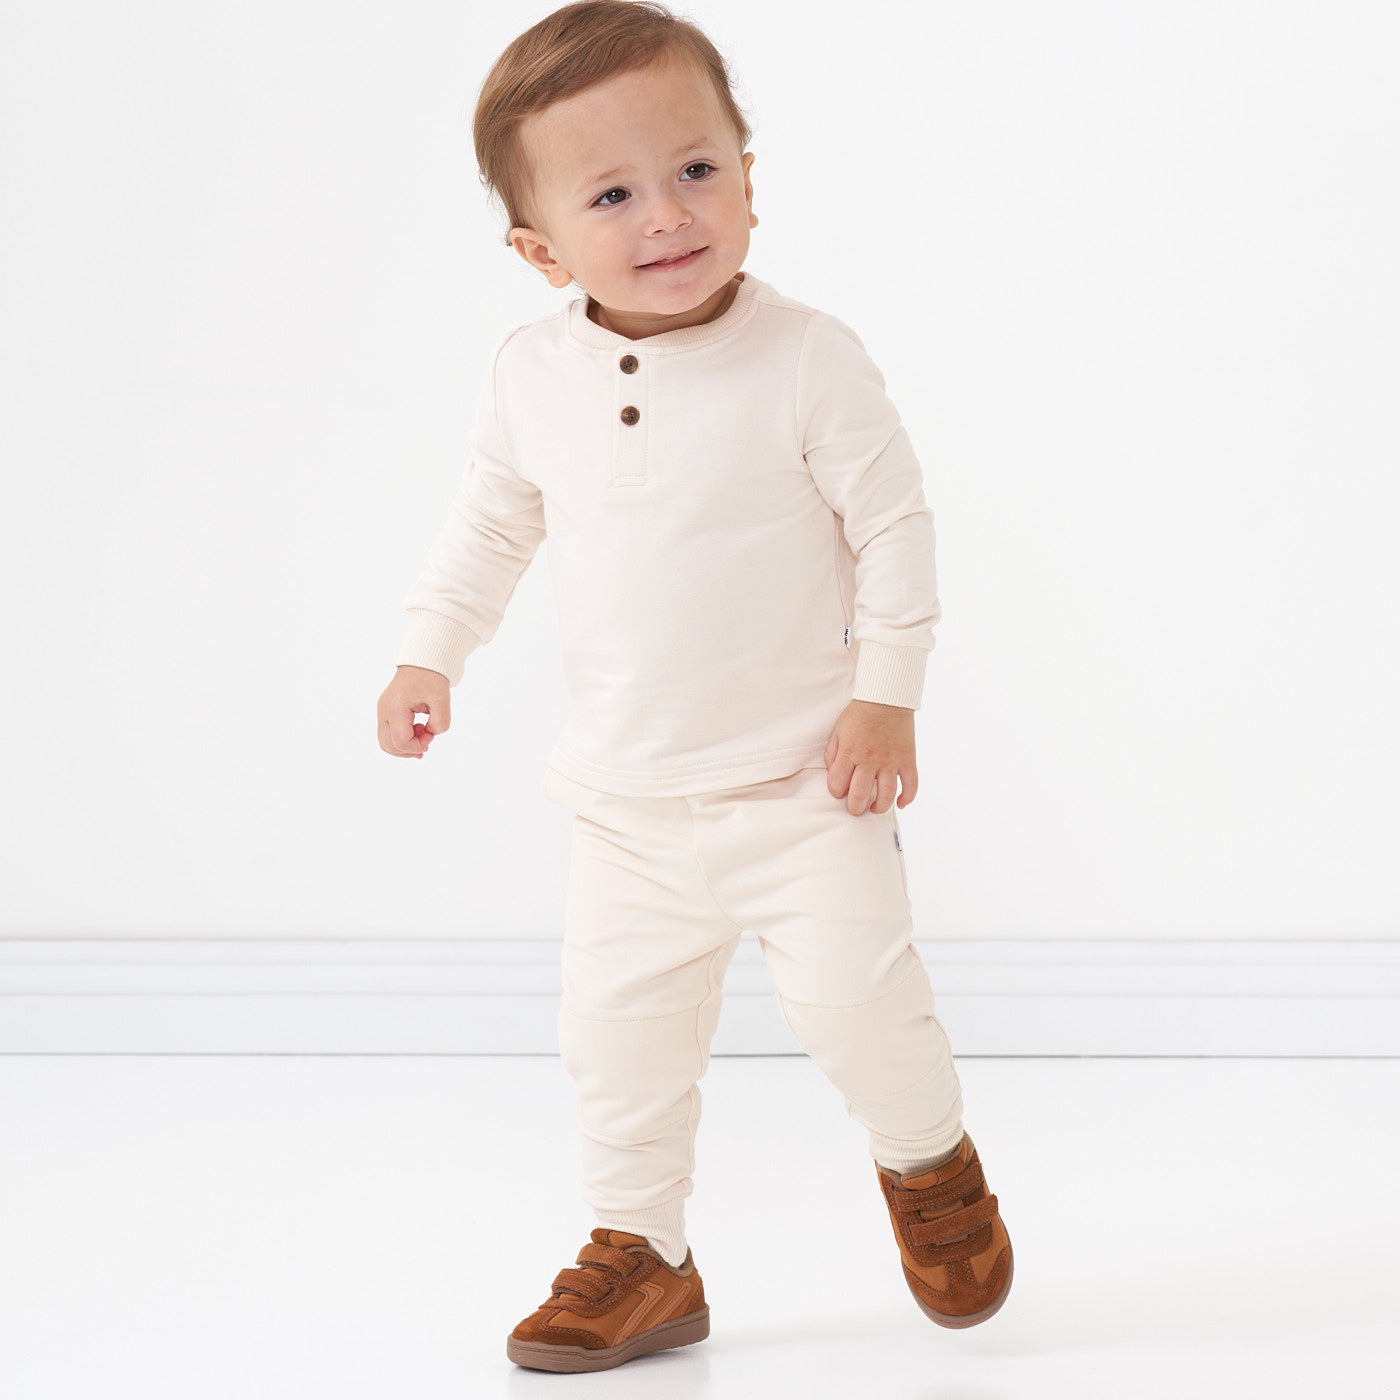 Child walking wearing a Cream henley tee and matching joggers